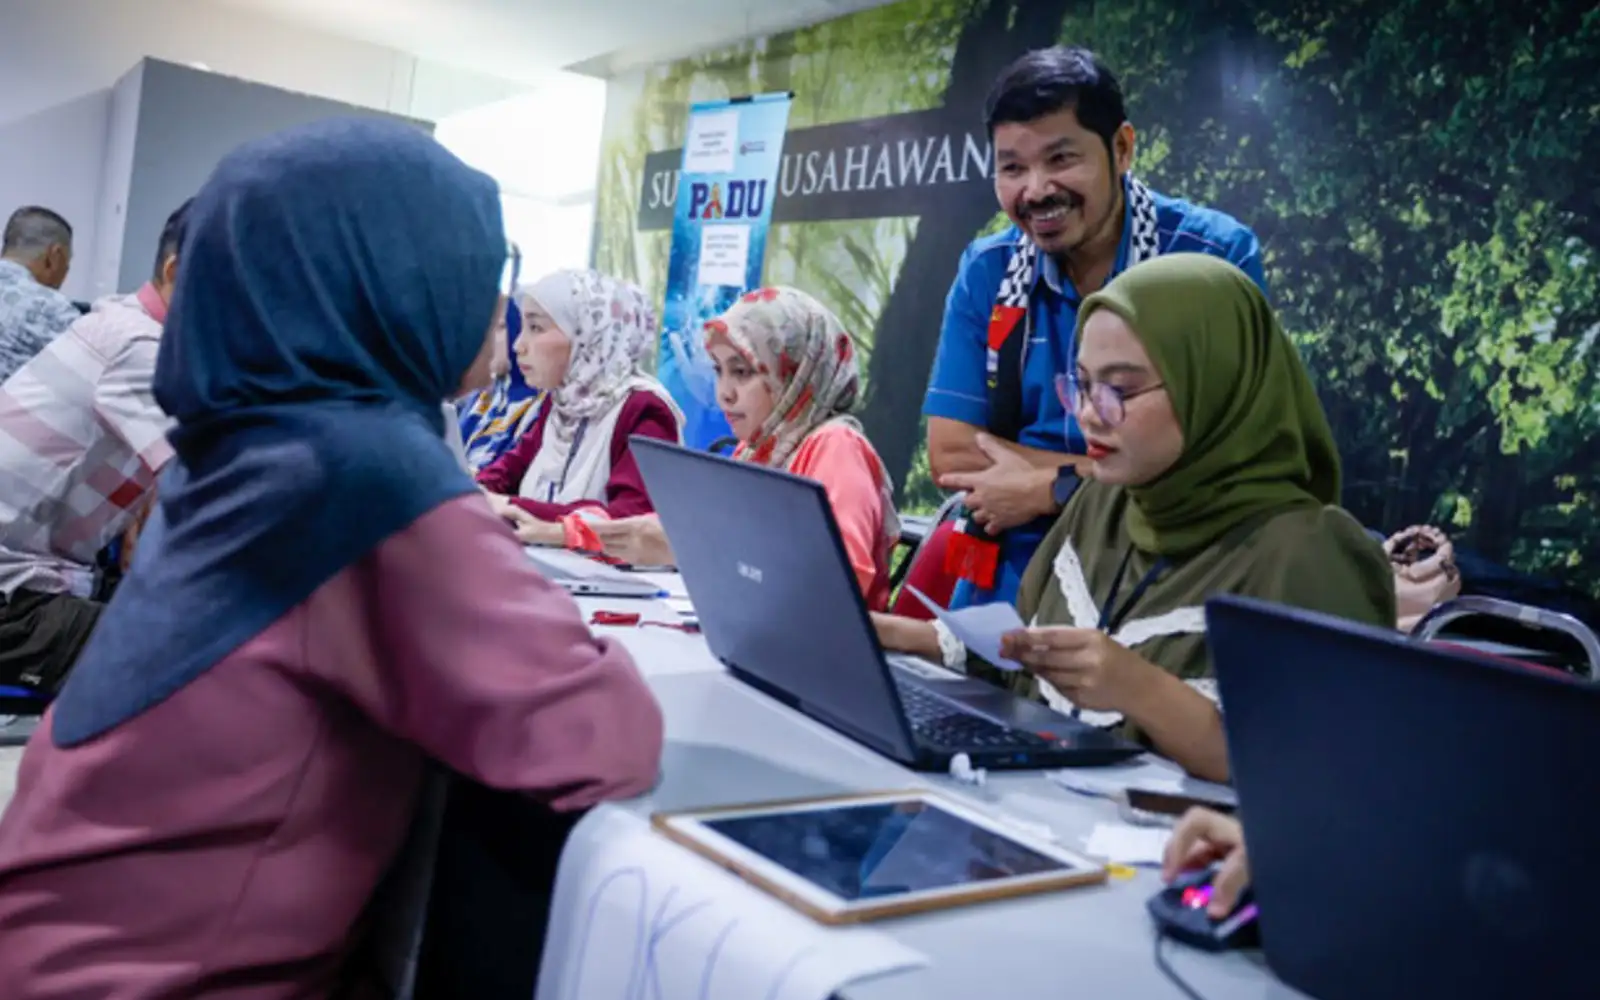 300 extra padu registration counters opened